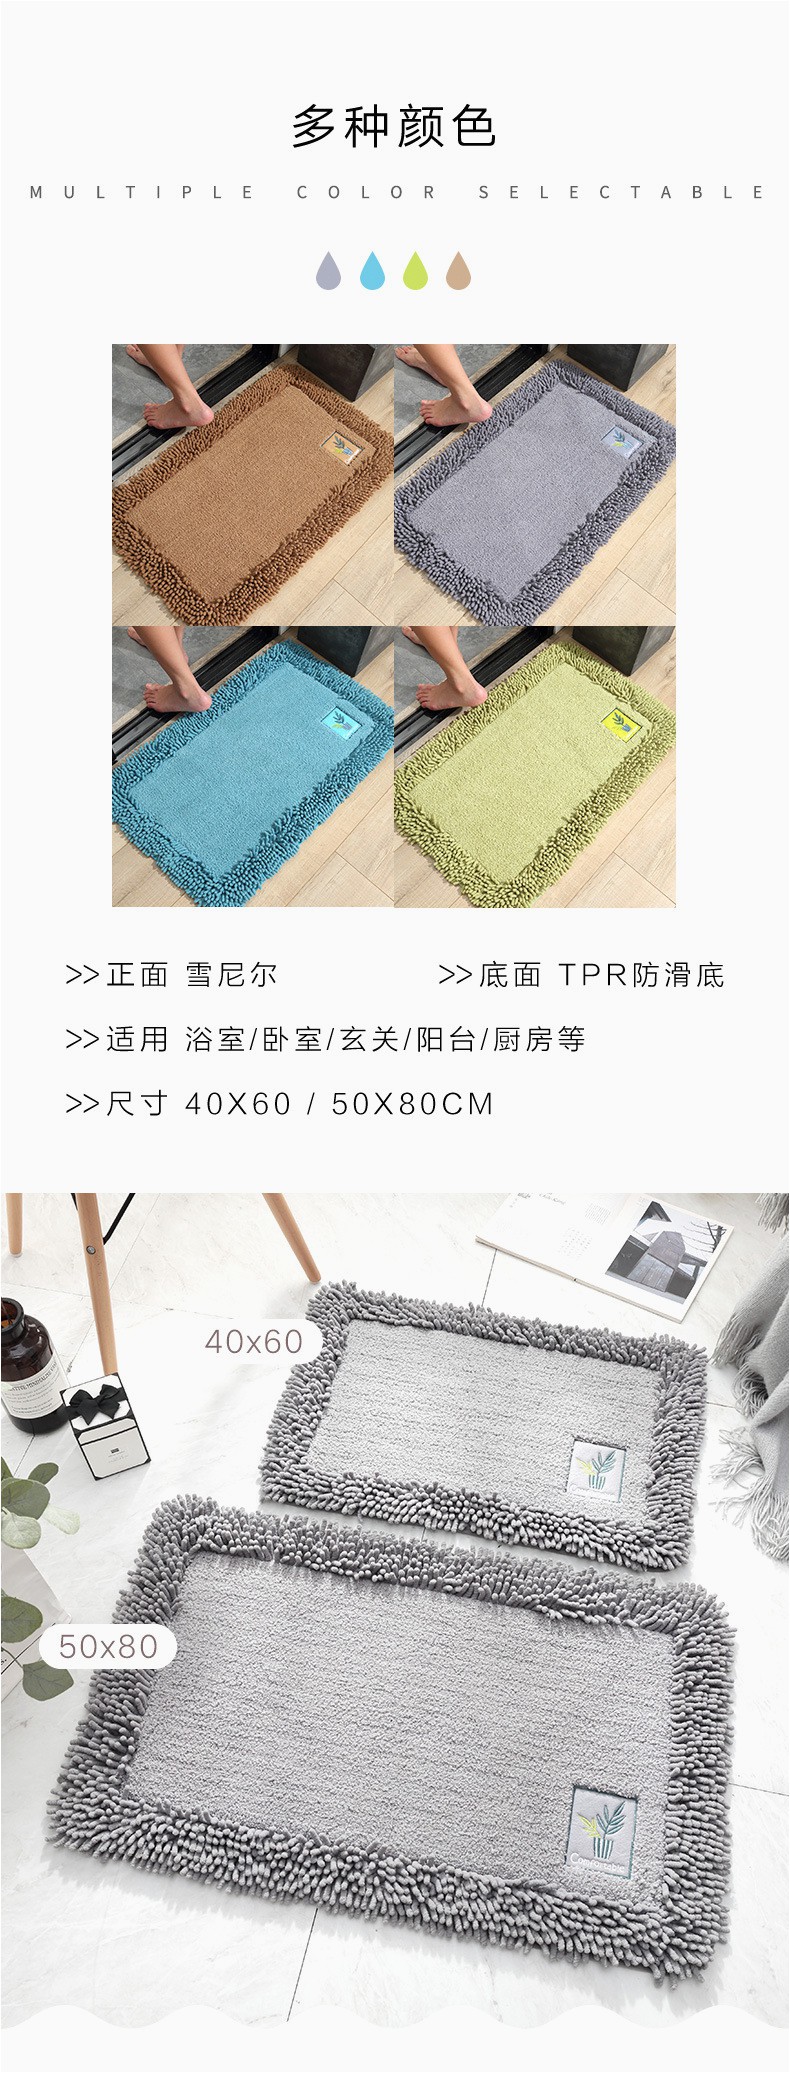 Cotton Chenille Bath Rug 2020 Simple solid Color Cotton Chenille Bath Mat Plant Embroidery Bathroom Rug Super soft Absorbent Non Slip Bathroom Door Mat T From Luo09